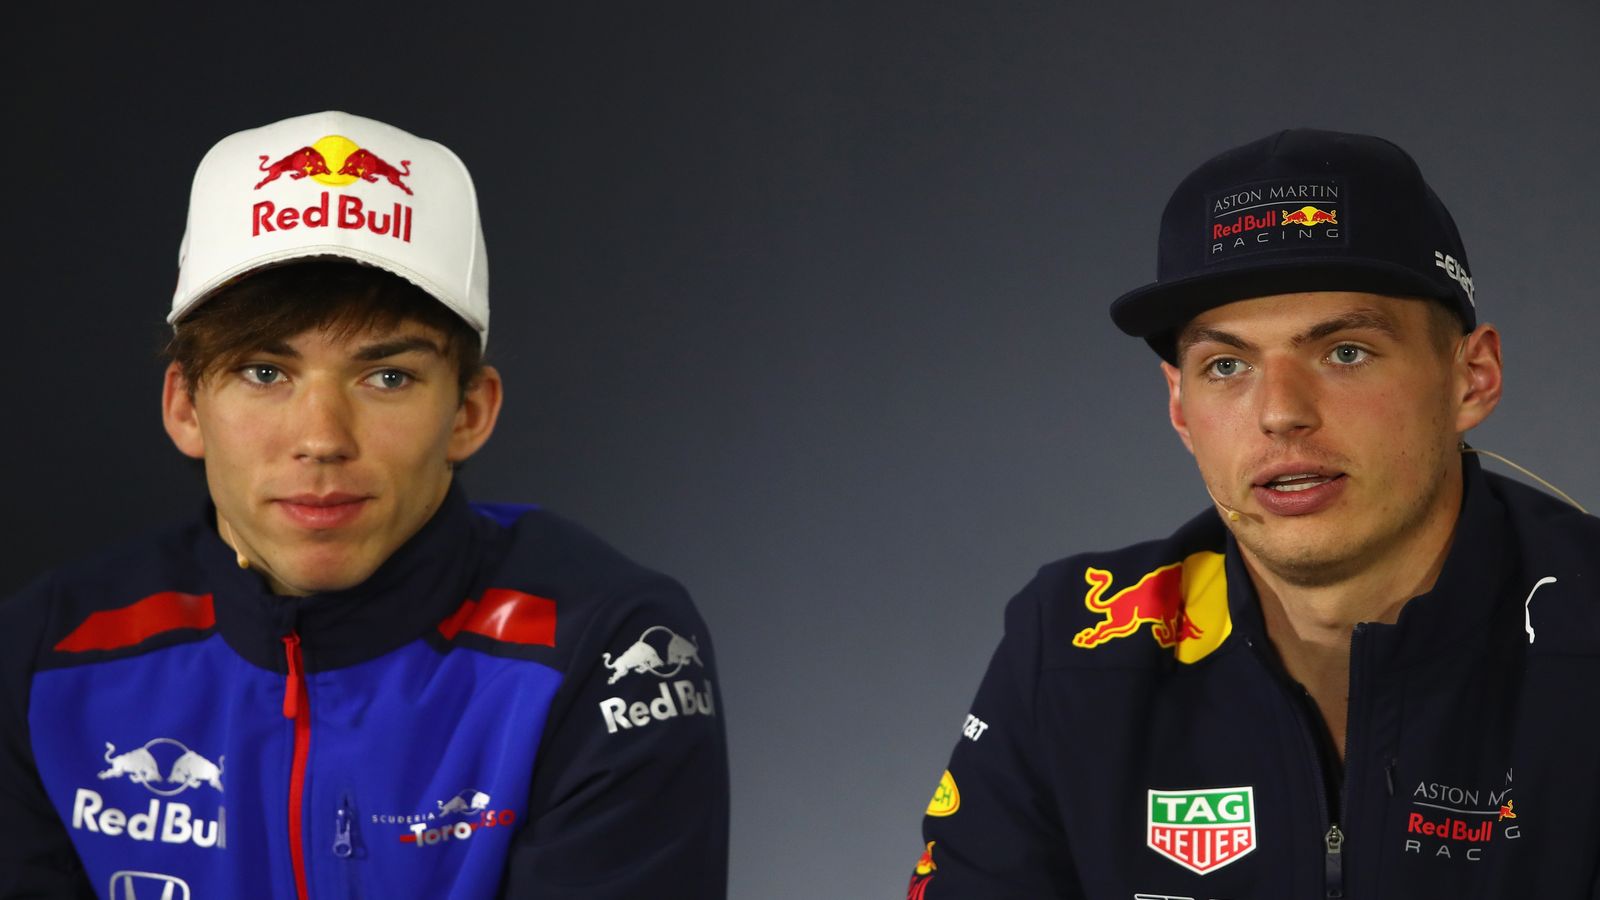 F1 in 2019: Pierre Gasly on challenge of Max Verstappen | F1 News